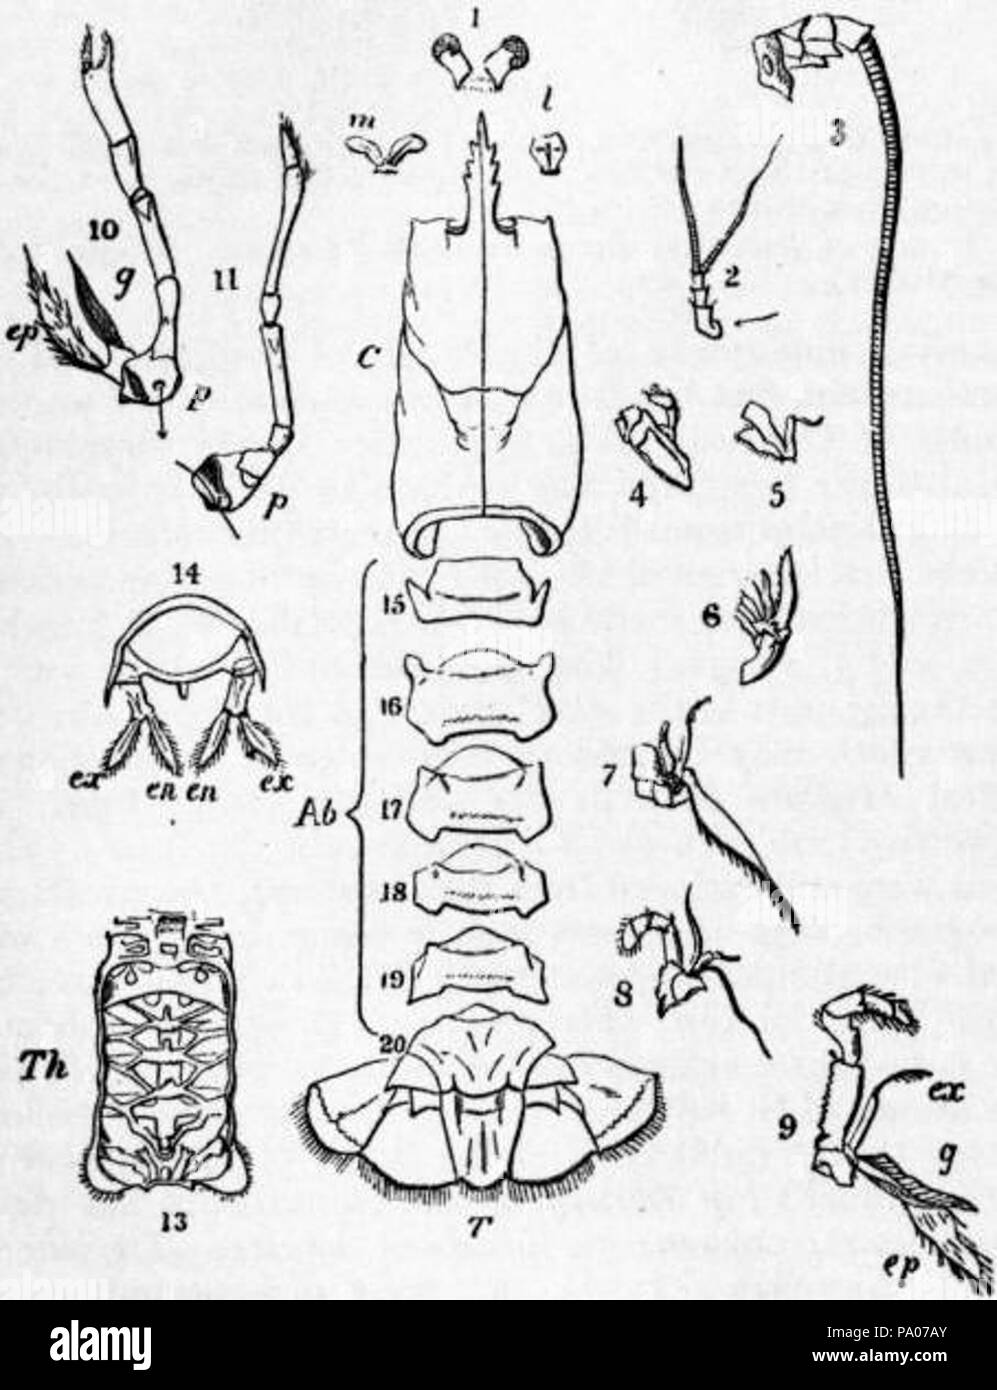 602 EB1911 Crustacea Fig. 3.—The Separated Somites and Appendages of the Common Lobster Stock Photo